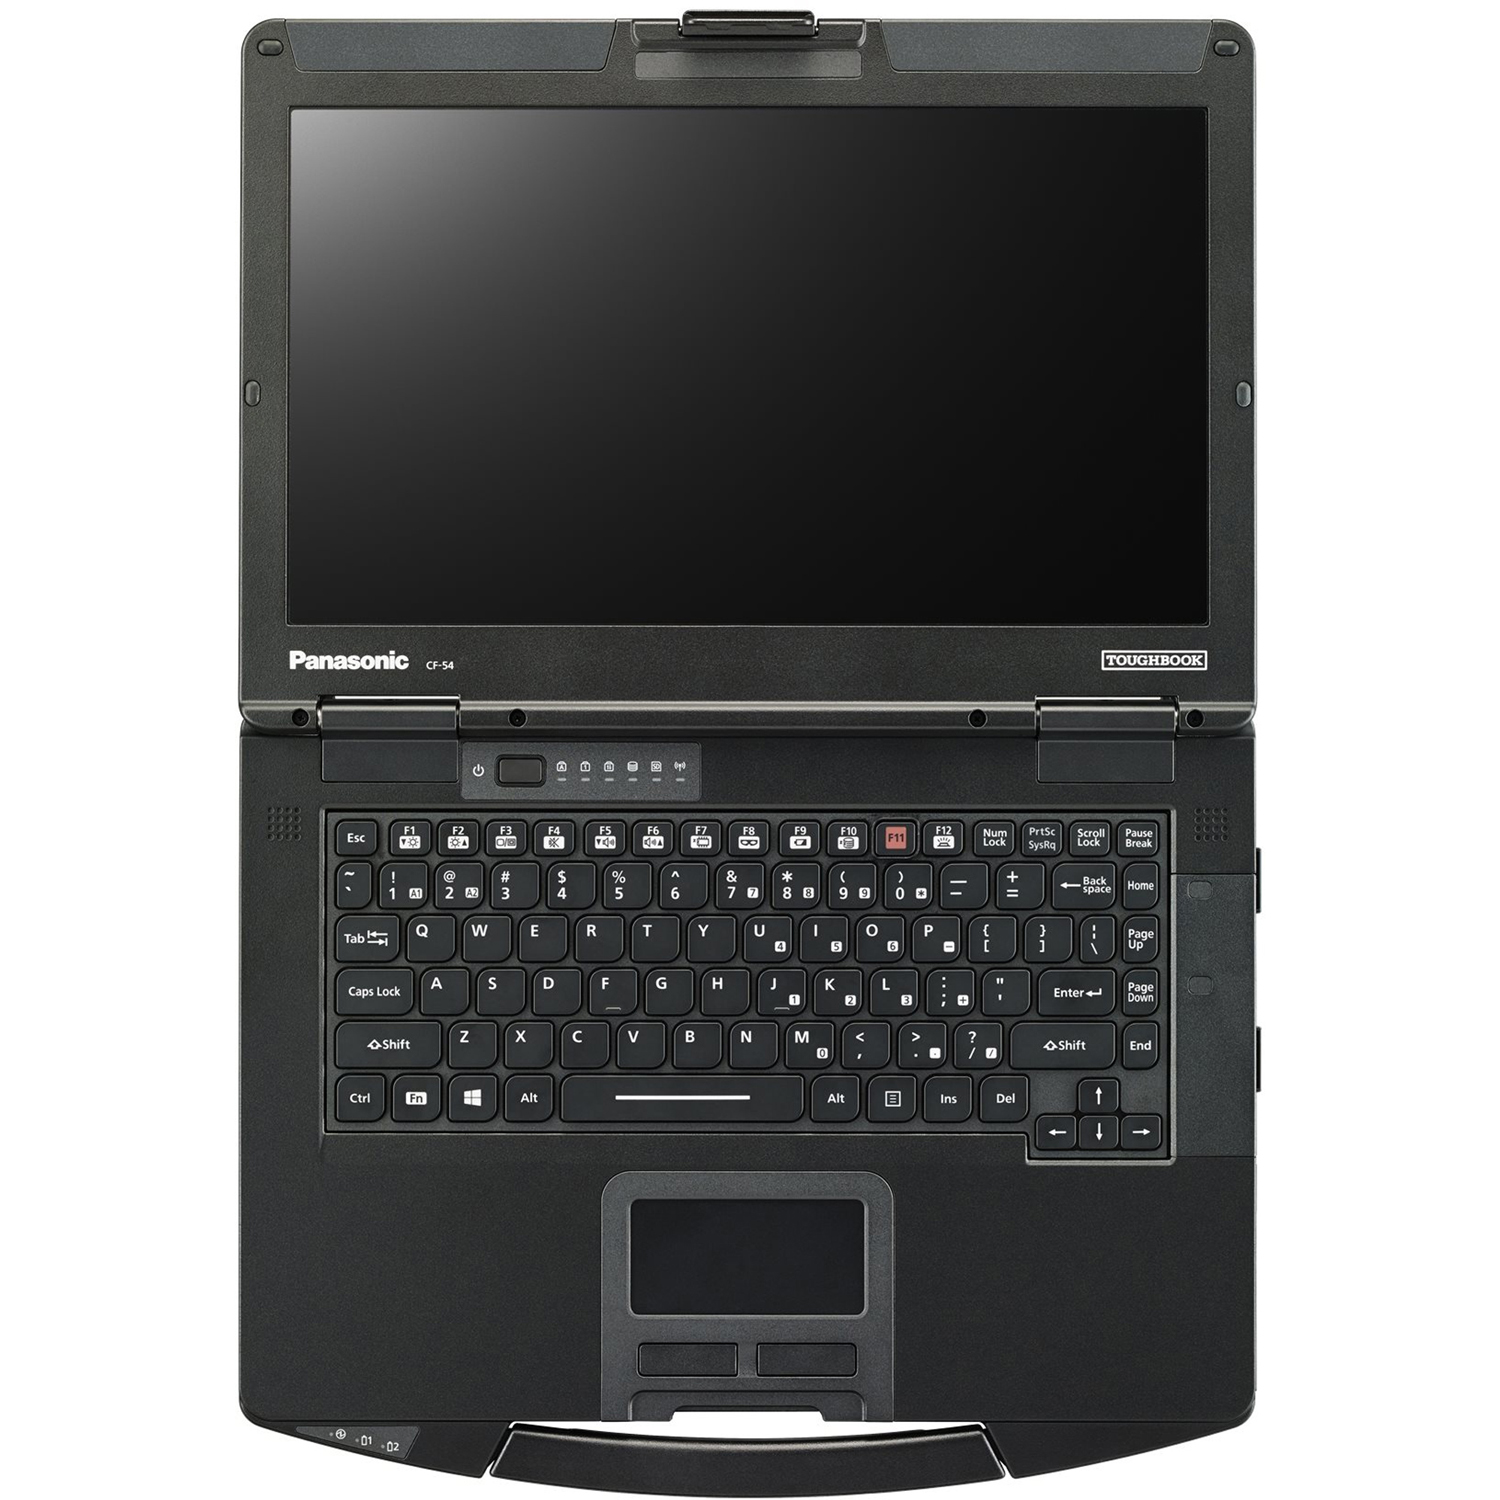 Panasonic Toughbook 54 Prime - Intel Core i5 - 7300U / up to 3.5 GHz - vPro - Win 10 Pro - HD Graphics 620 - 8 GB RAM - 256 GB SSD - DVD SuperMulti - 14" 1366 x 768 (HD) - Wi-Fi 5 - 4G LTE - with Toughbook Preferred - image 4 of 6